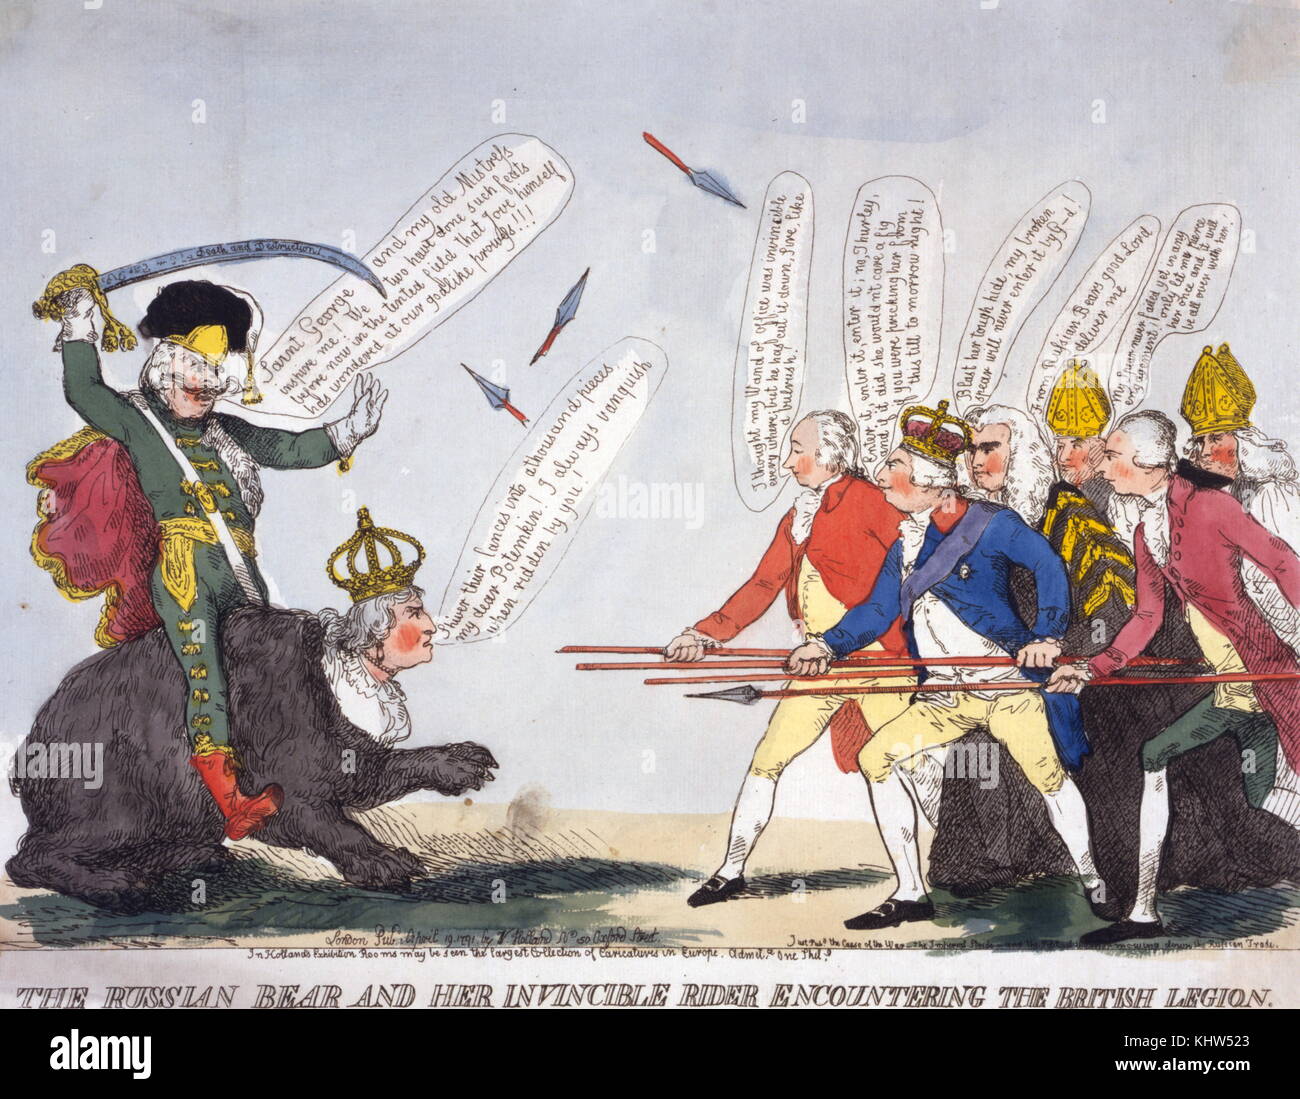 Cartoon titled 'The Russian Bear and Her Incredible Rider Encountering the British Legion' by W. Holland. The cartoon depicts Grigory Potemkin (1739-1791) with a sword raised overhead and wearing a hussar's uniform, whilst riding Catherine the Great (1729-1796) who is dressed like a black bear. They approach King George III (1738-1820) and his minister: William Pitt the Younger (1759-1806) James Cecil, 1st Marquess of Salisbury (748-1823) and Edward Thurlow, 1st Baron Thurlow (1731-1806), who are carrying spears, three of which have had their points broken off; behind them stand two bishops. Stock Photo